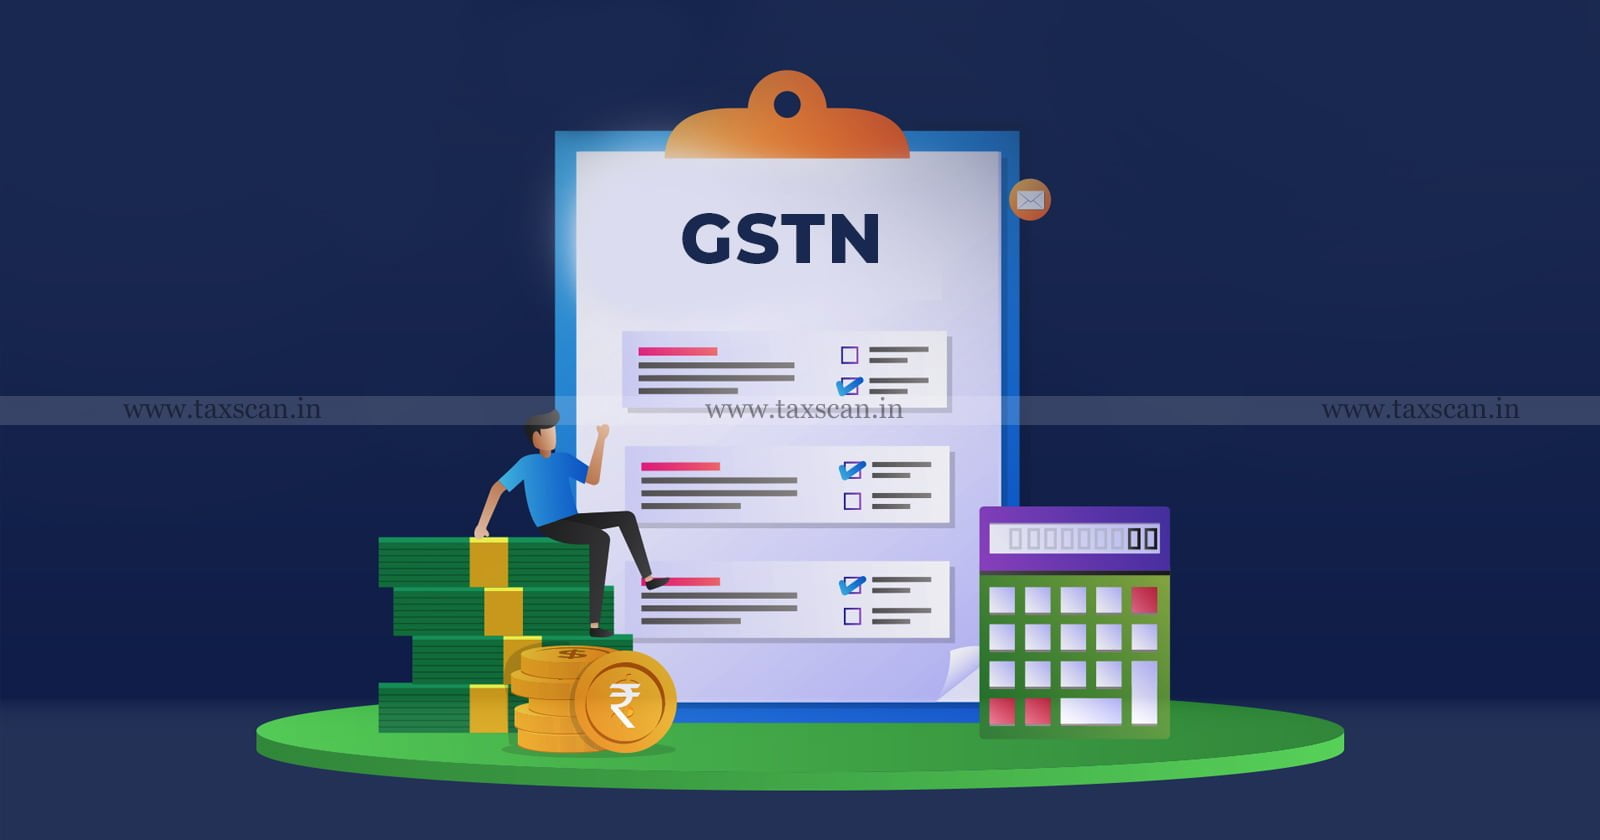 GSTN - Safeguard Taxpayers - GST Portal Nationwide - GST Portal - Goods and Services - Tax Network - TAXSCAN